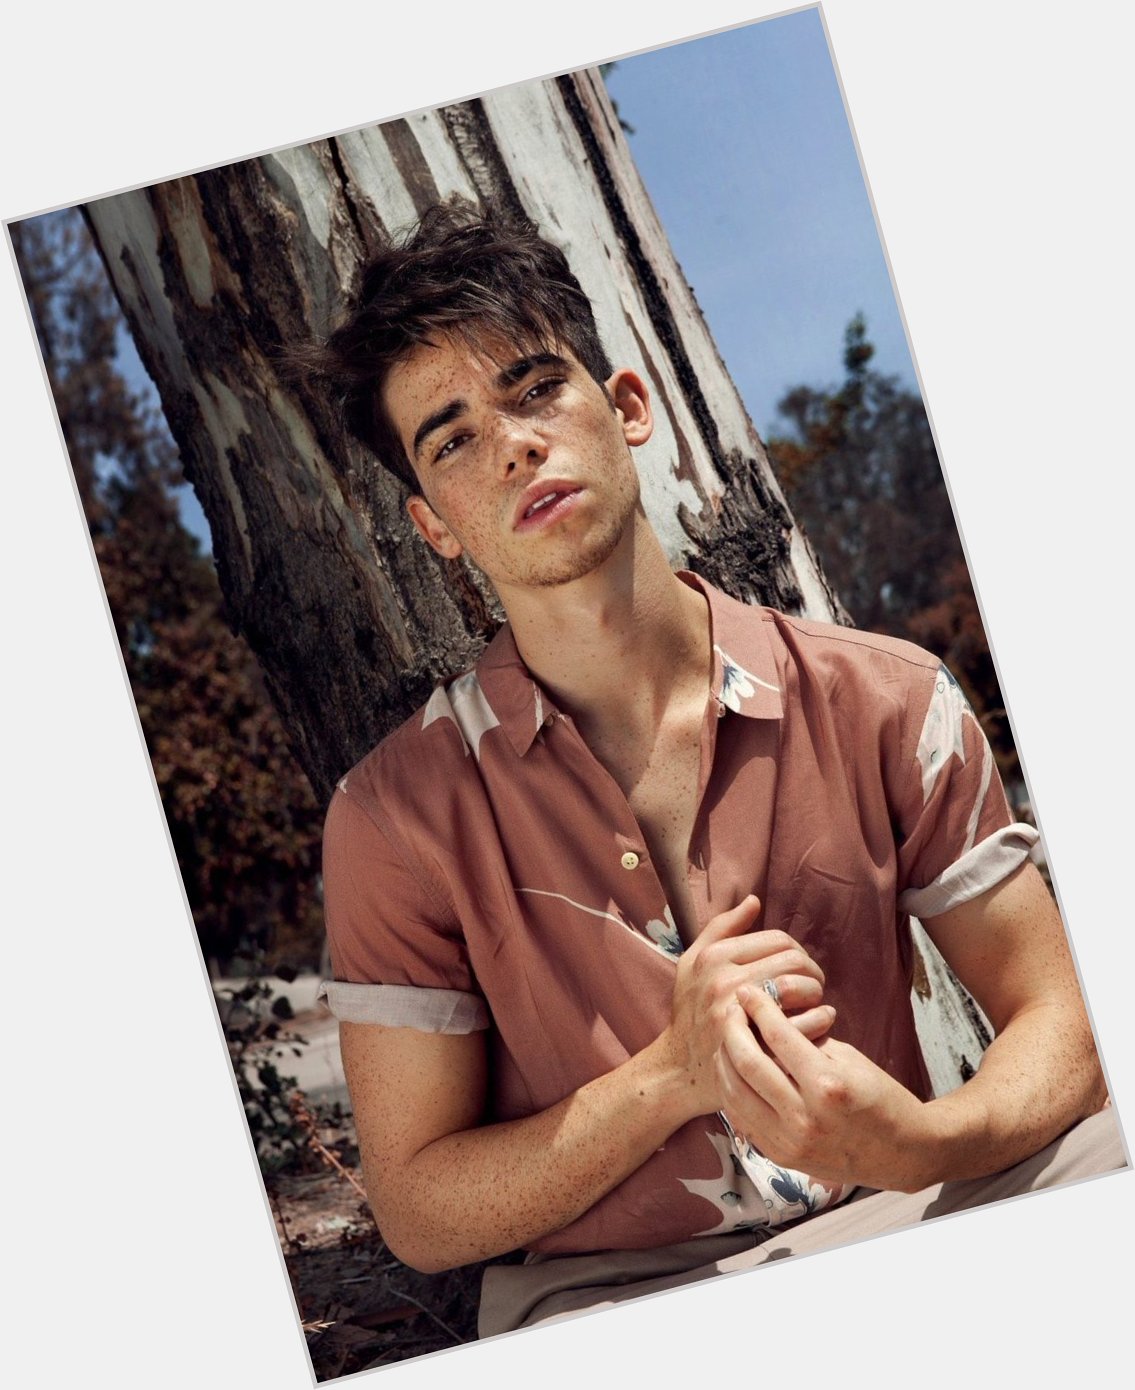 Happy birthday to the talented Cameron Boyce. He would ve been 24 today. 